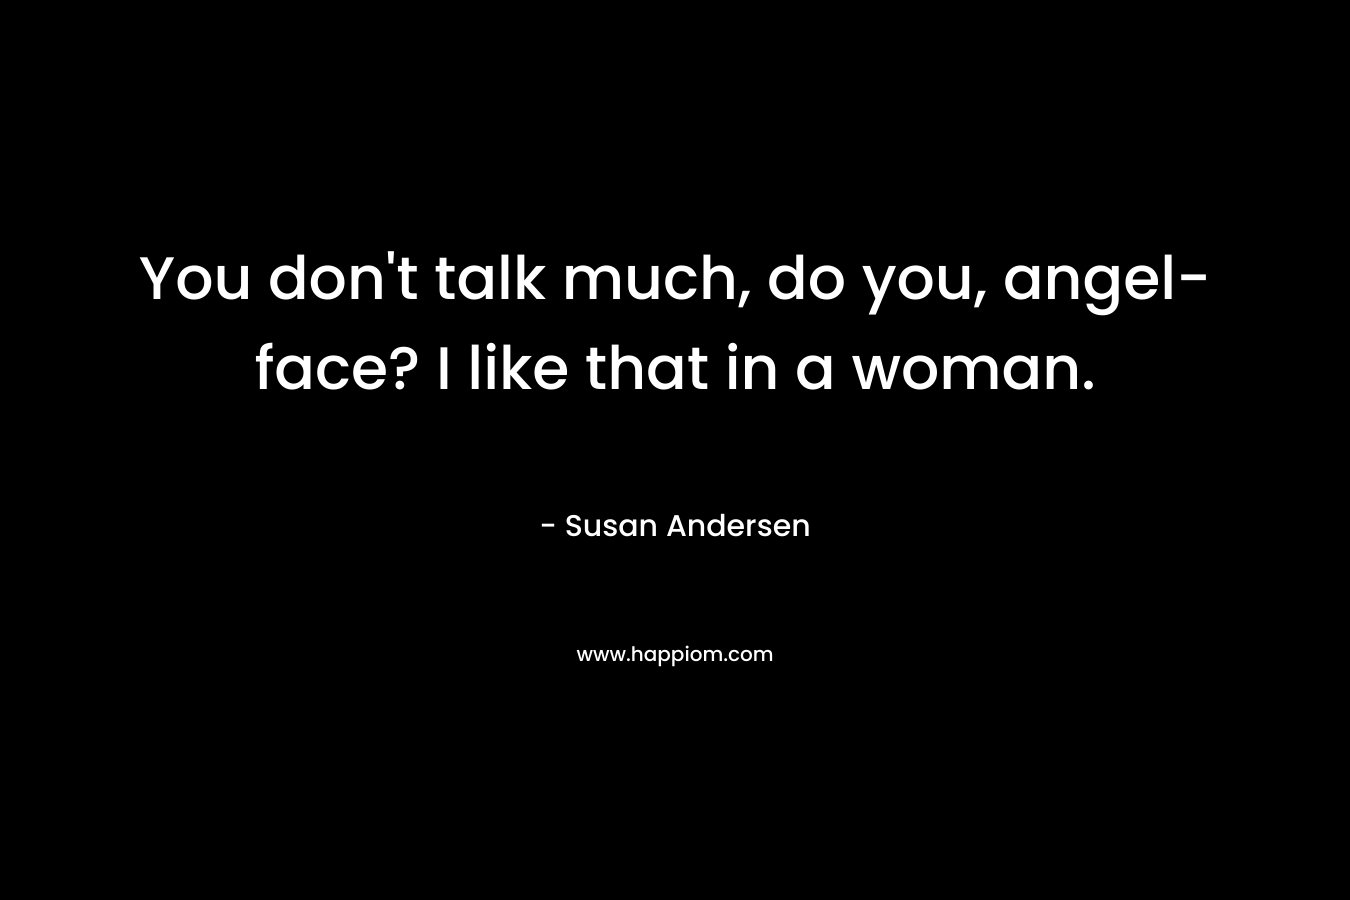 You don’t talk much, do you, angel-face? I like that in a woman. – Susan Andersen